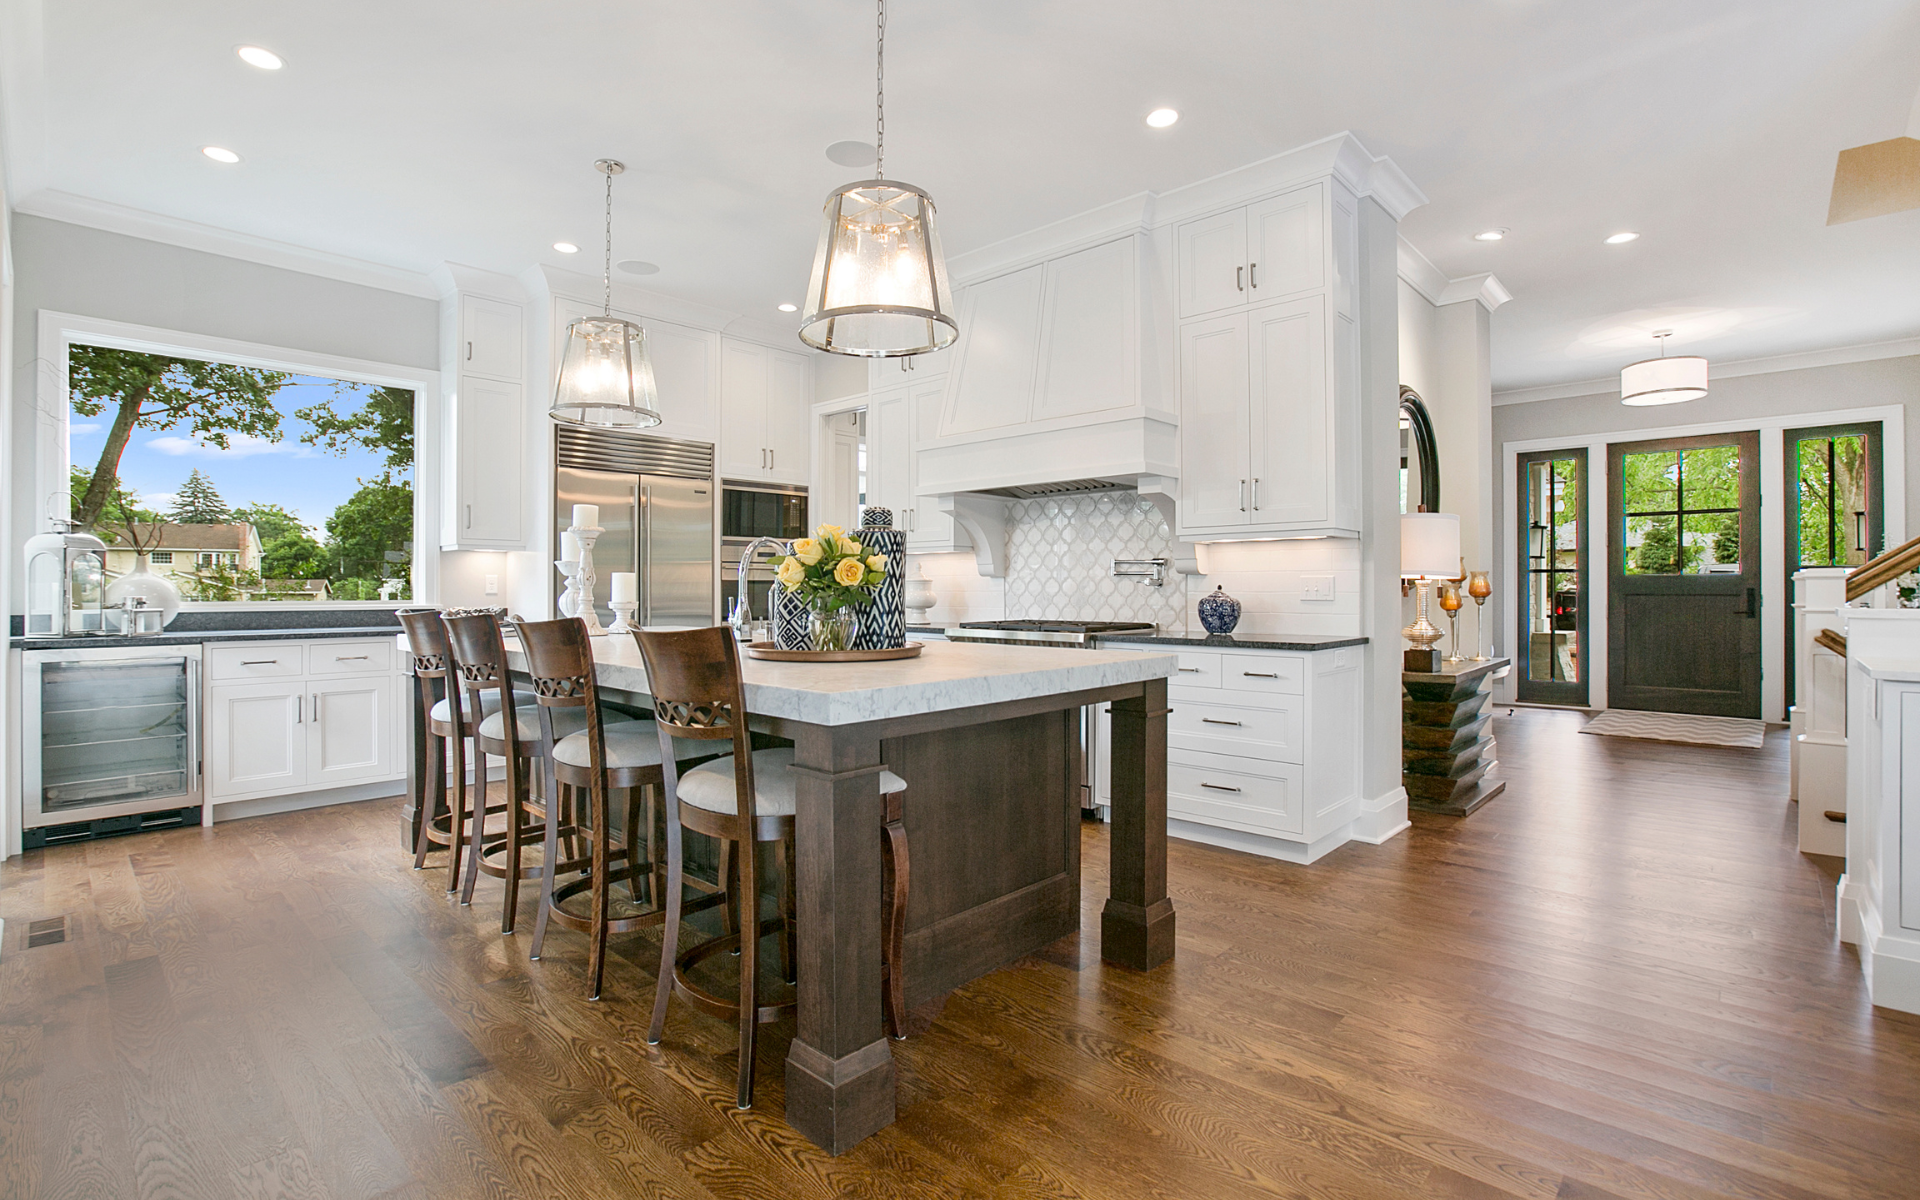 Sleek kitchen style with white cabinets, and wood flooring